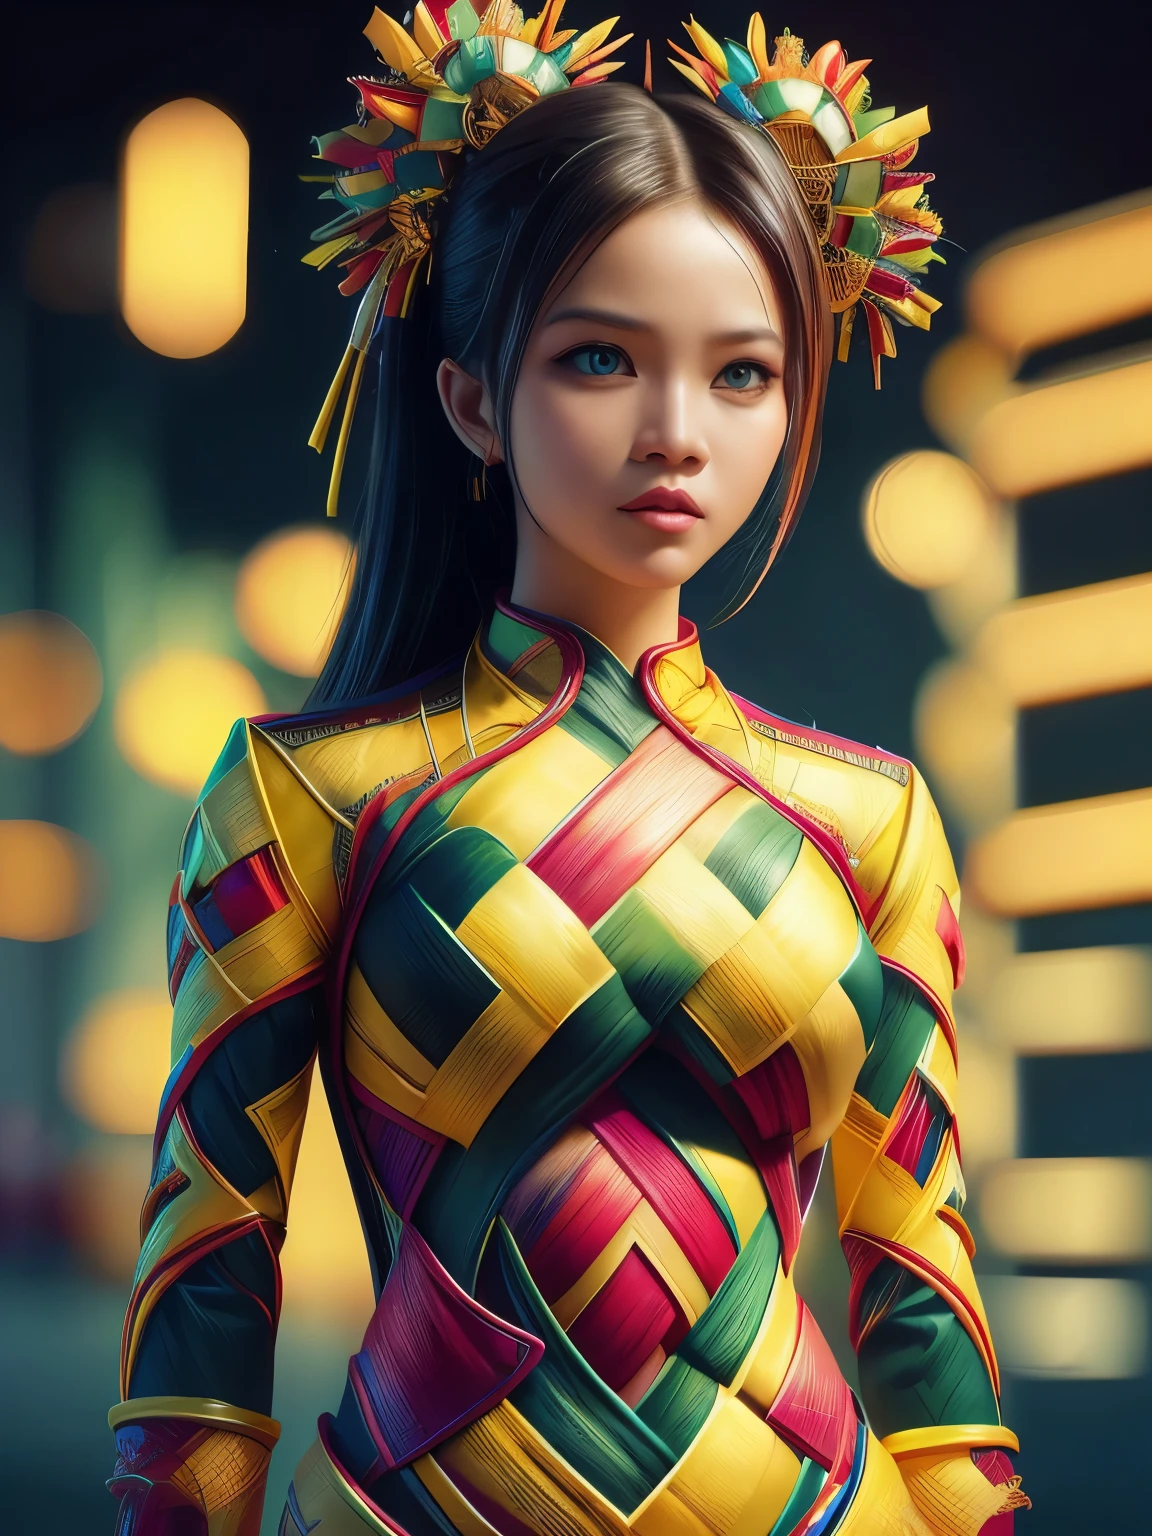 An Indonesian-styled futuristic suit worn by a girl depicting cultural fusion and modern fashion. The suit is adorned with intricate patterns and vibrant colors, showcasing the rich heritage of Indonesia. The girl stands confidently in a dynamic pose, with her detailed eyes reflecting determination and curiosity. The suit's material is a combination of traditional textiles and futuristic synthetic fabrics, giving it a unique and avant-garde appearance. The overall image quality is of the highest standard, with sharp focus and ultra-detailed rendering. The artwork employs physically-based rendering techniques, resulting in realistic lighting and shadows. The colors are vivid and vibrant, capturing the essence of Indonesian cultural aesthetics. The background features a fusion of modern architecture and traditional elements, creating a harmonious blend of the past and the future. The prompt explores the intersection of Indonesian culture, futuristic design, and the artistic representation of a confident girl.